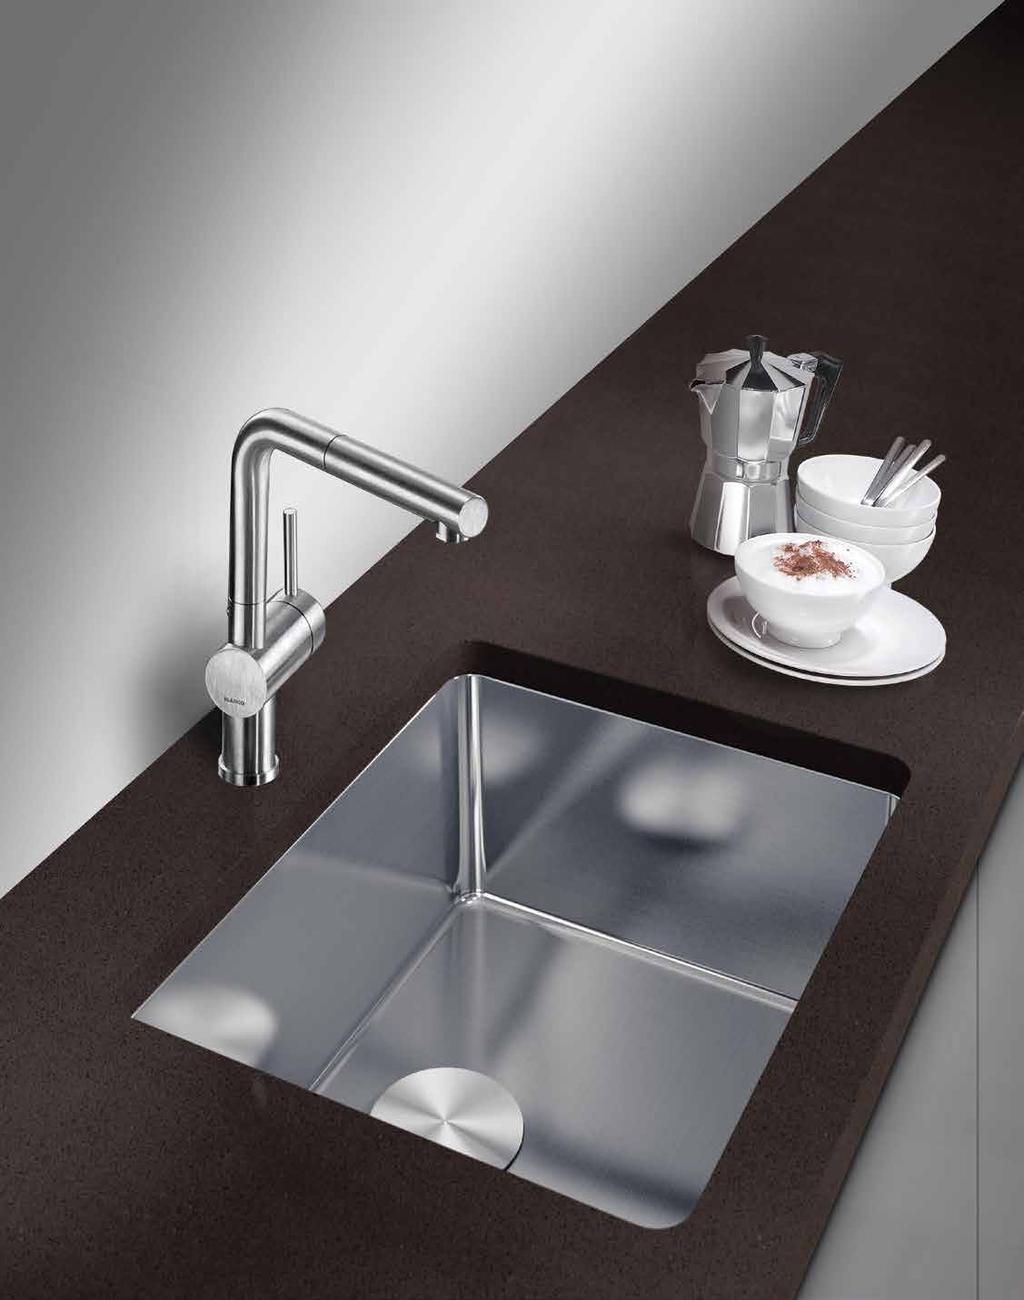 BLANCO Stainless Steel s Timeless Beauty and Durability BLANCO offers a diverse variety of modern stainless steel sinks.